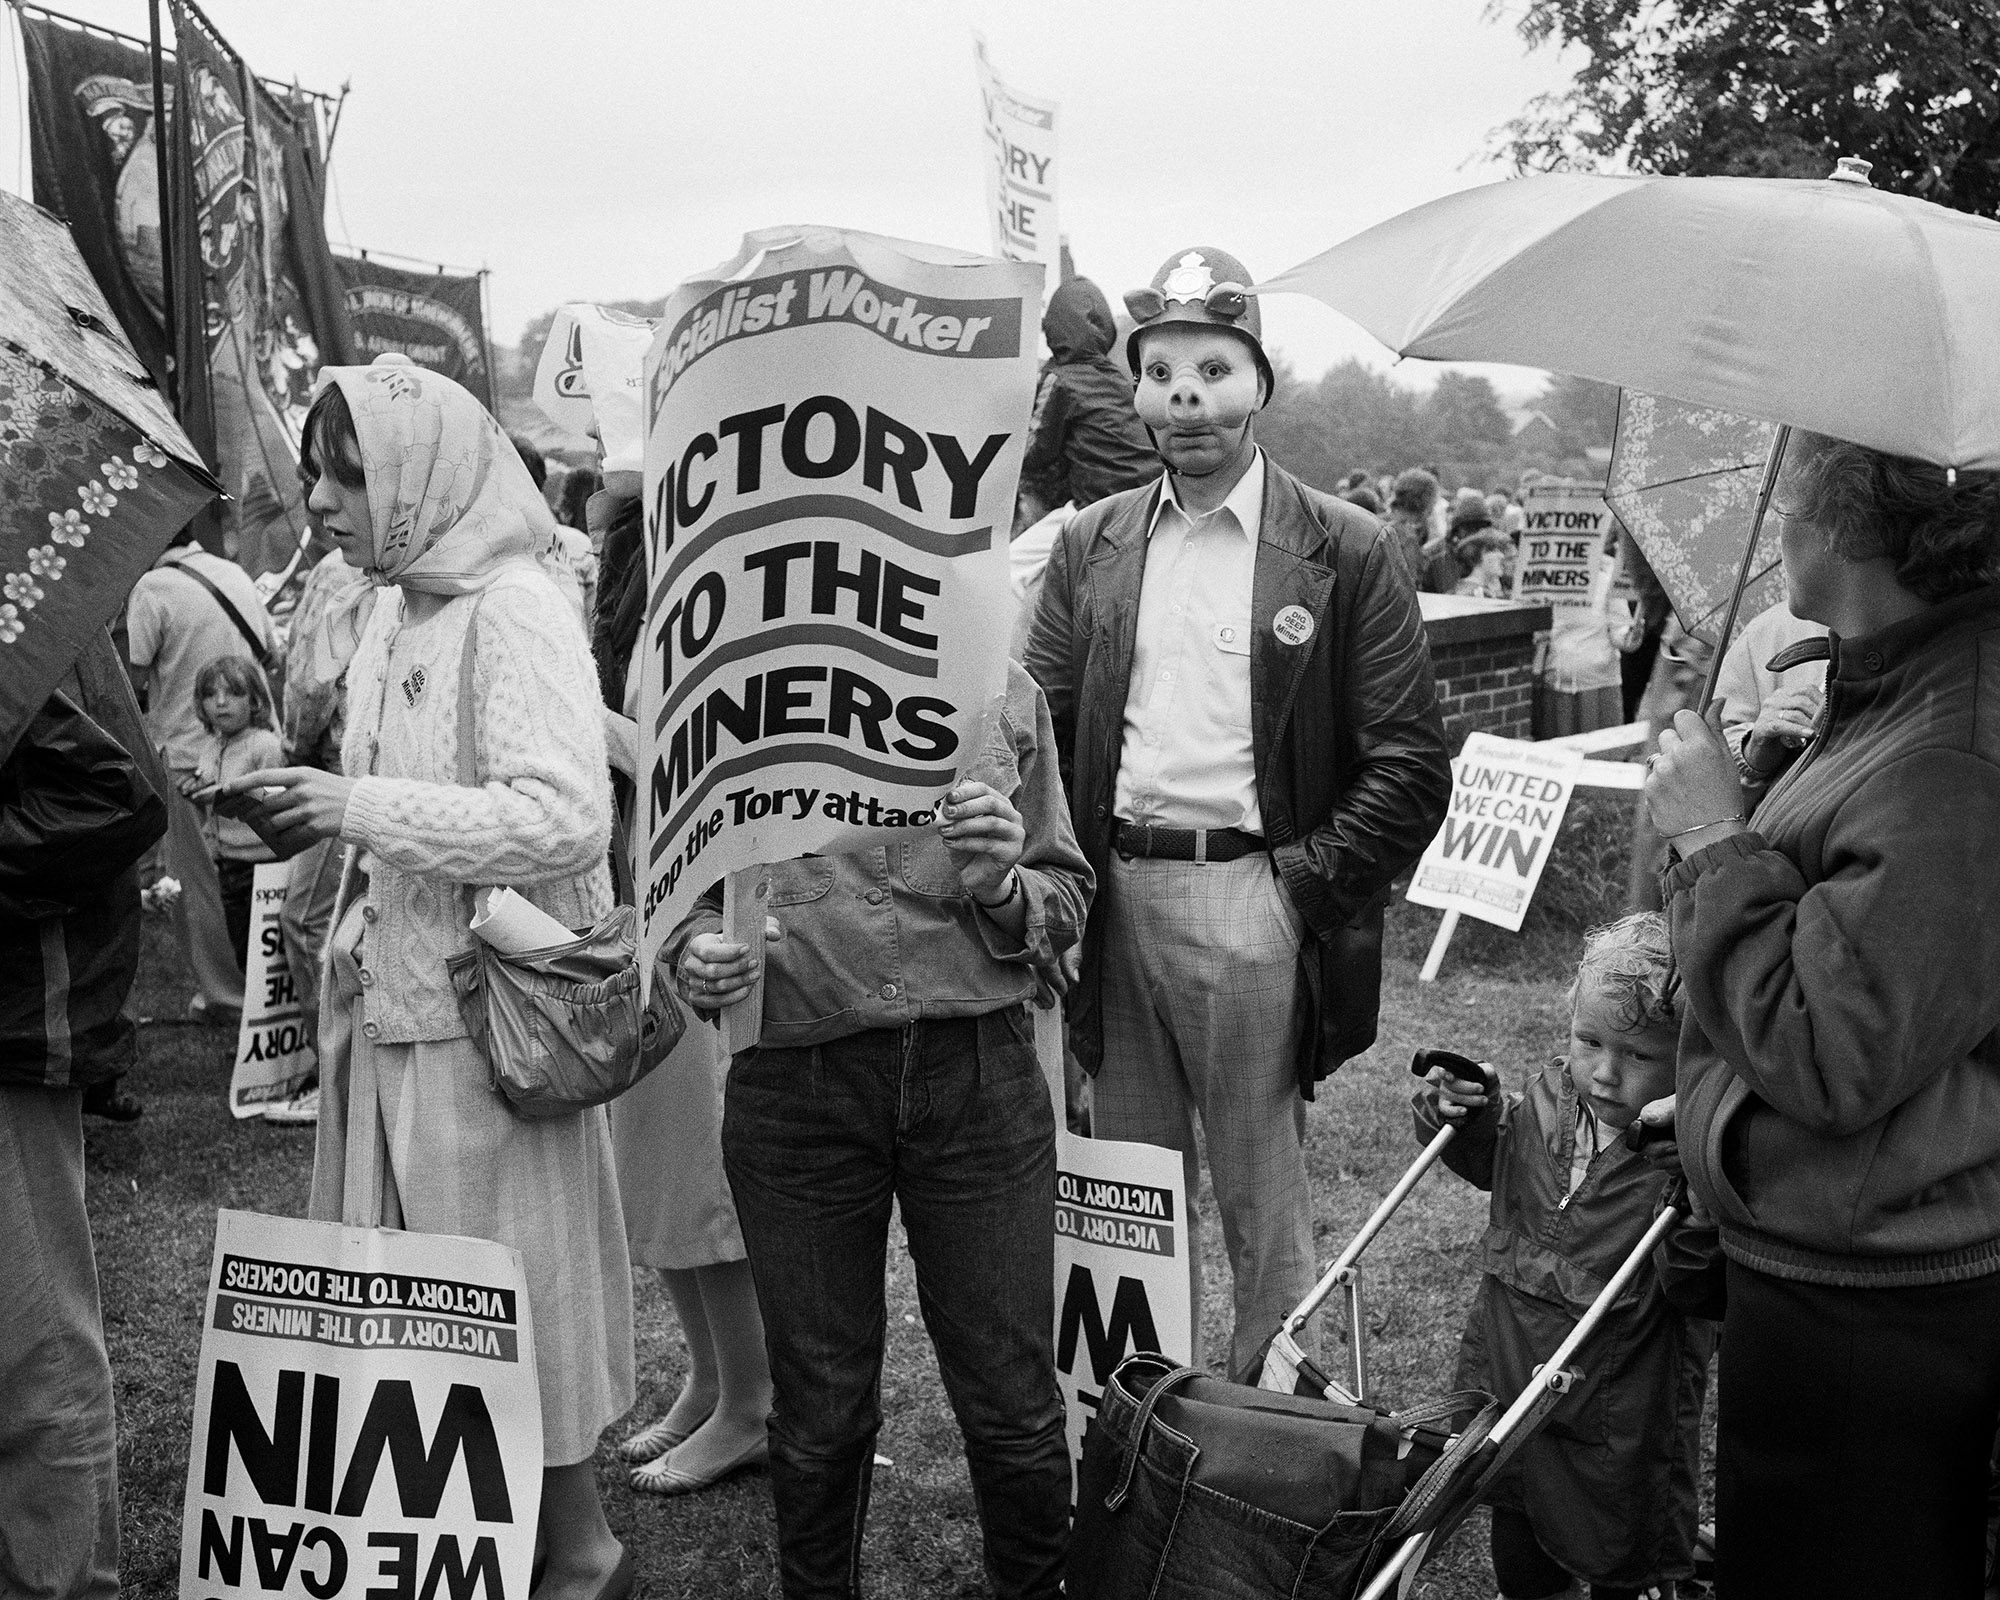 Black and white photograph of protestors holding signs that read 'Victory to the miners' and 'United we can win'. At the centre of the image is a person wearing a pig mask and a police helmet with pig ears protruding from it